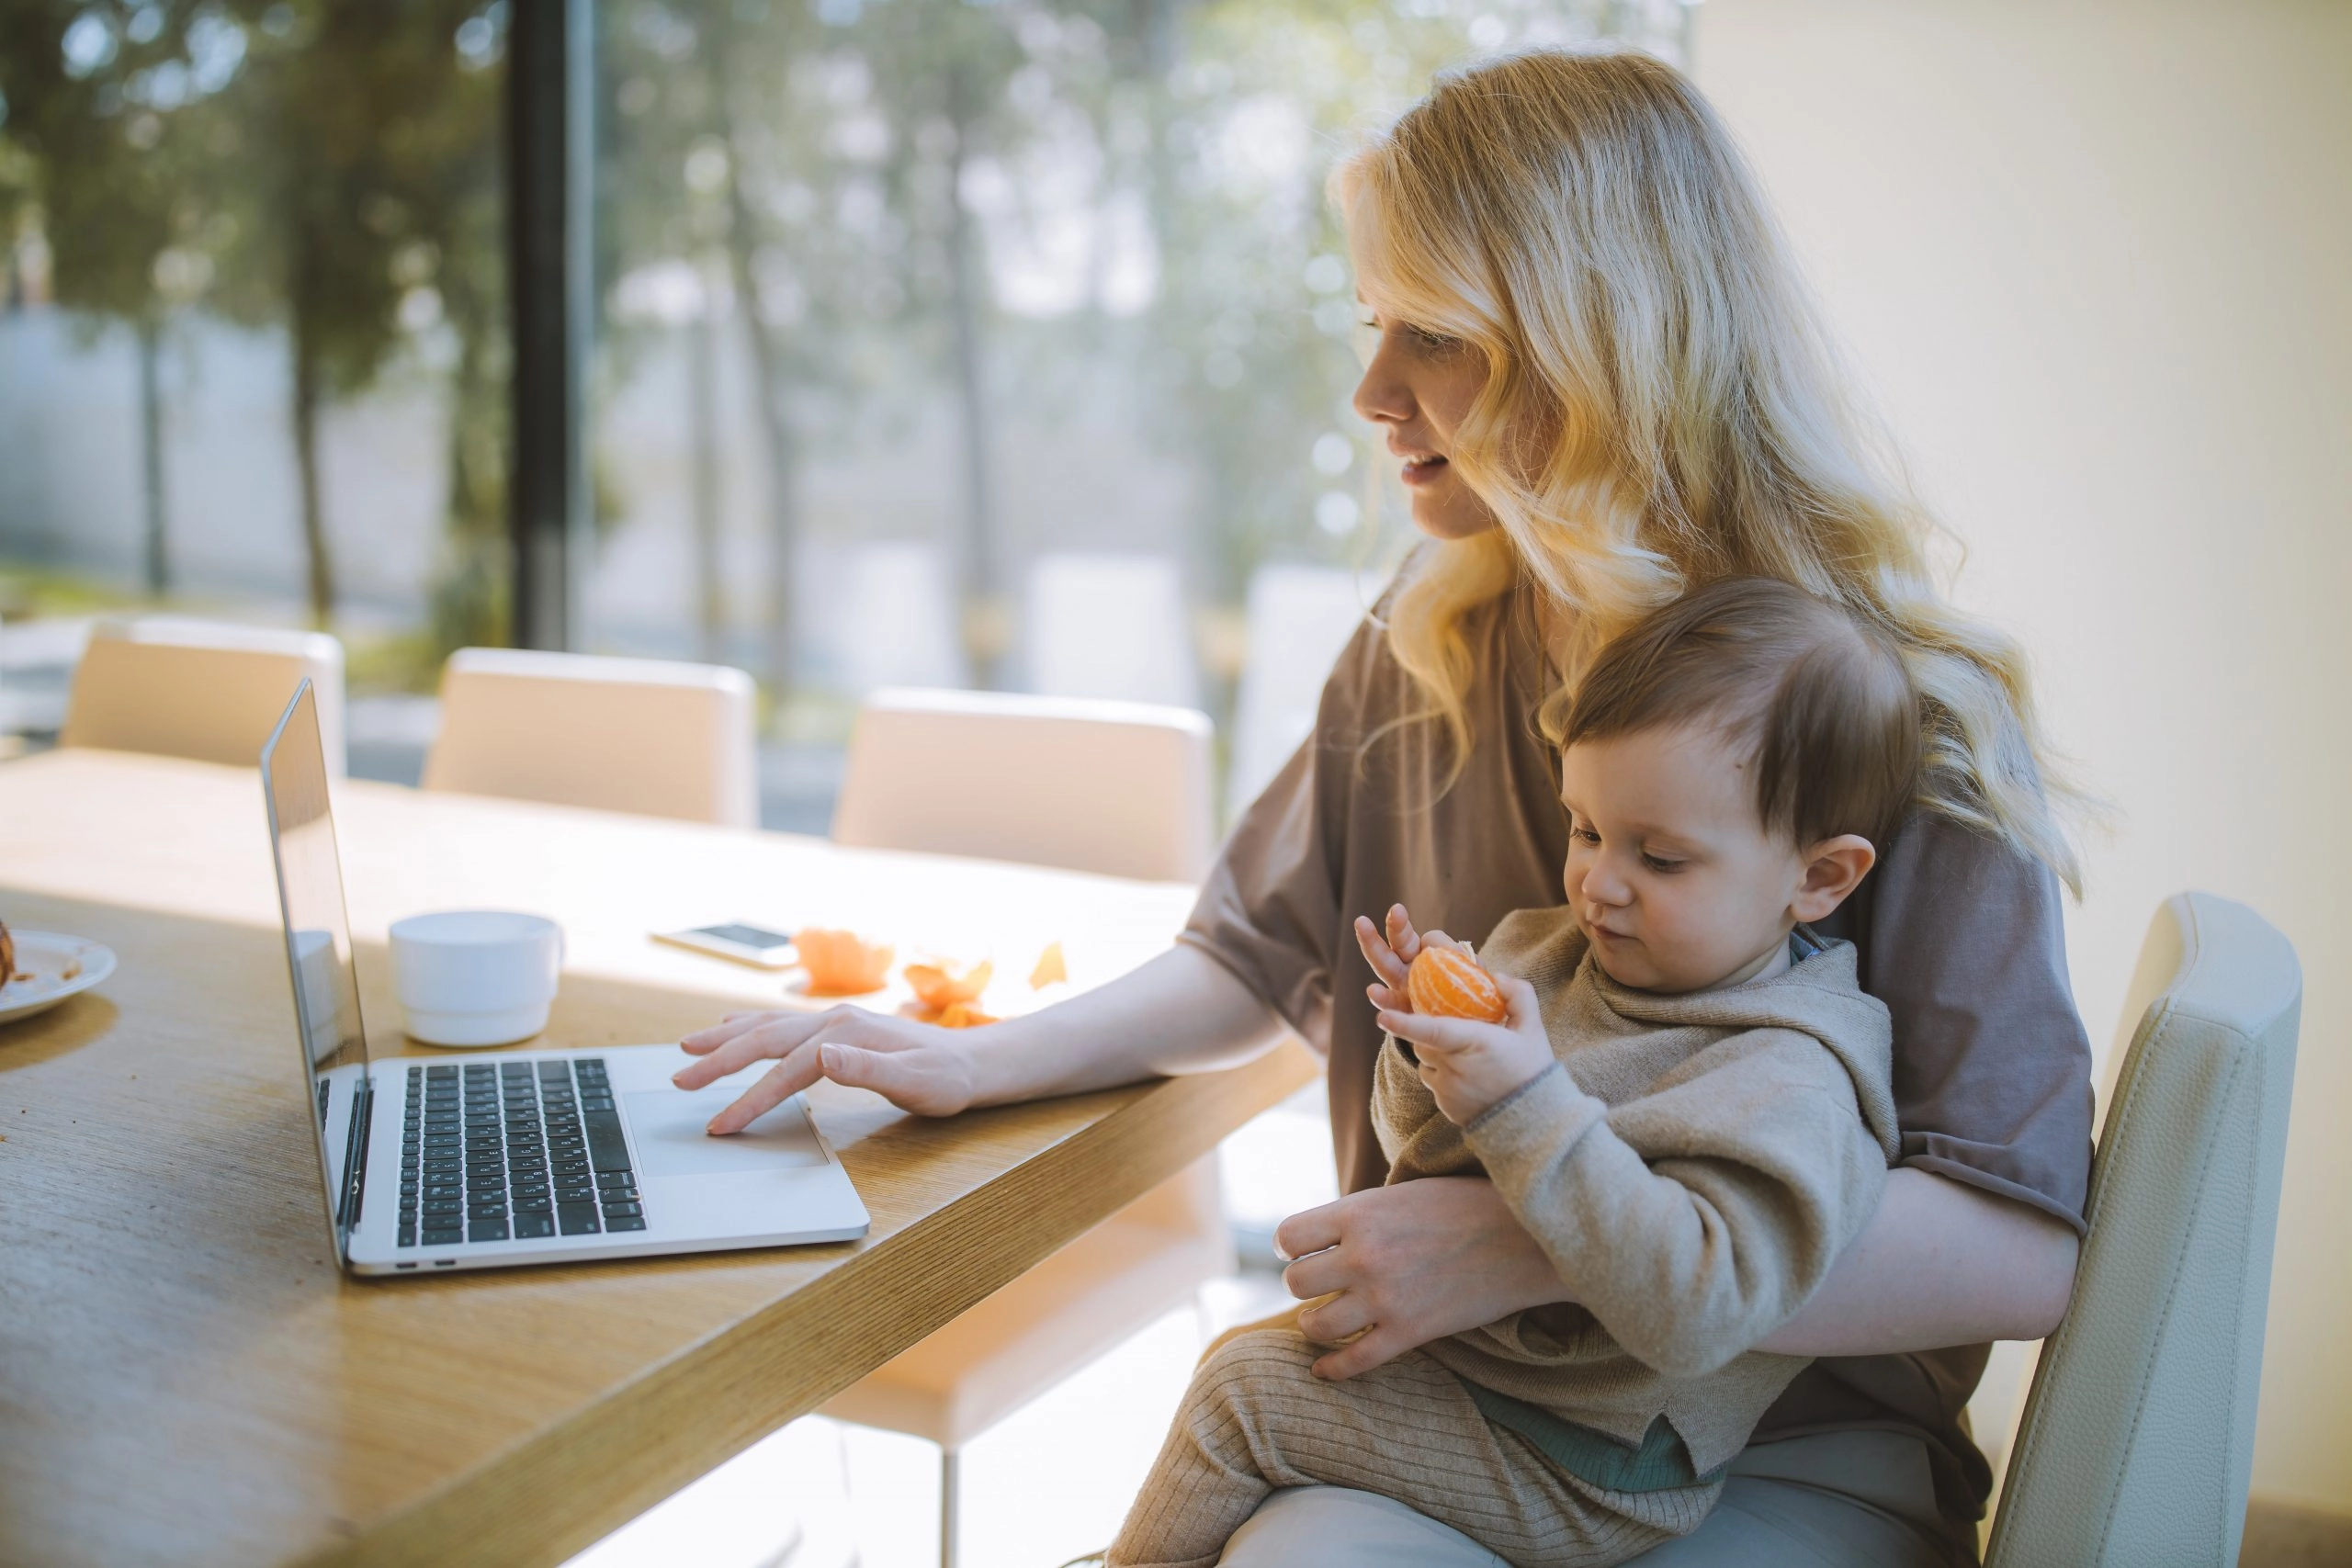 Six Tips When Working From Home